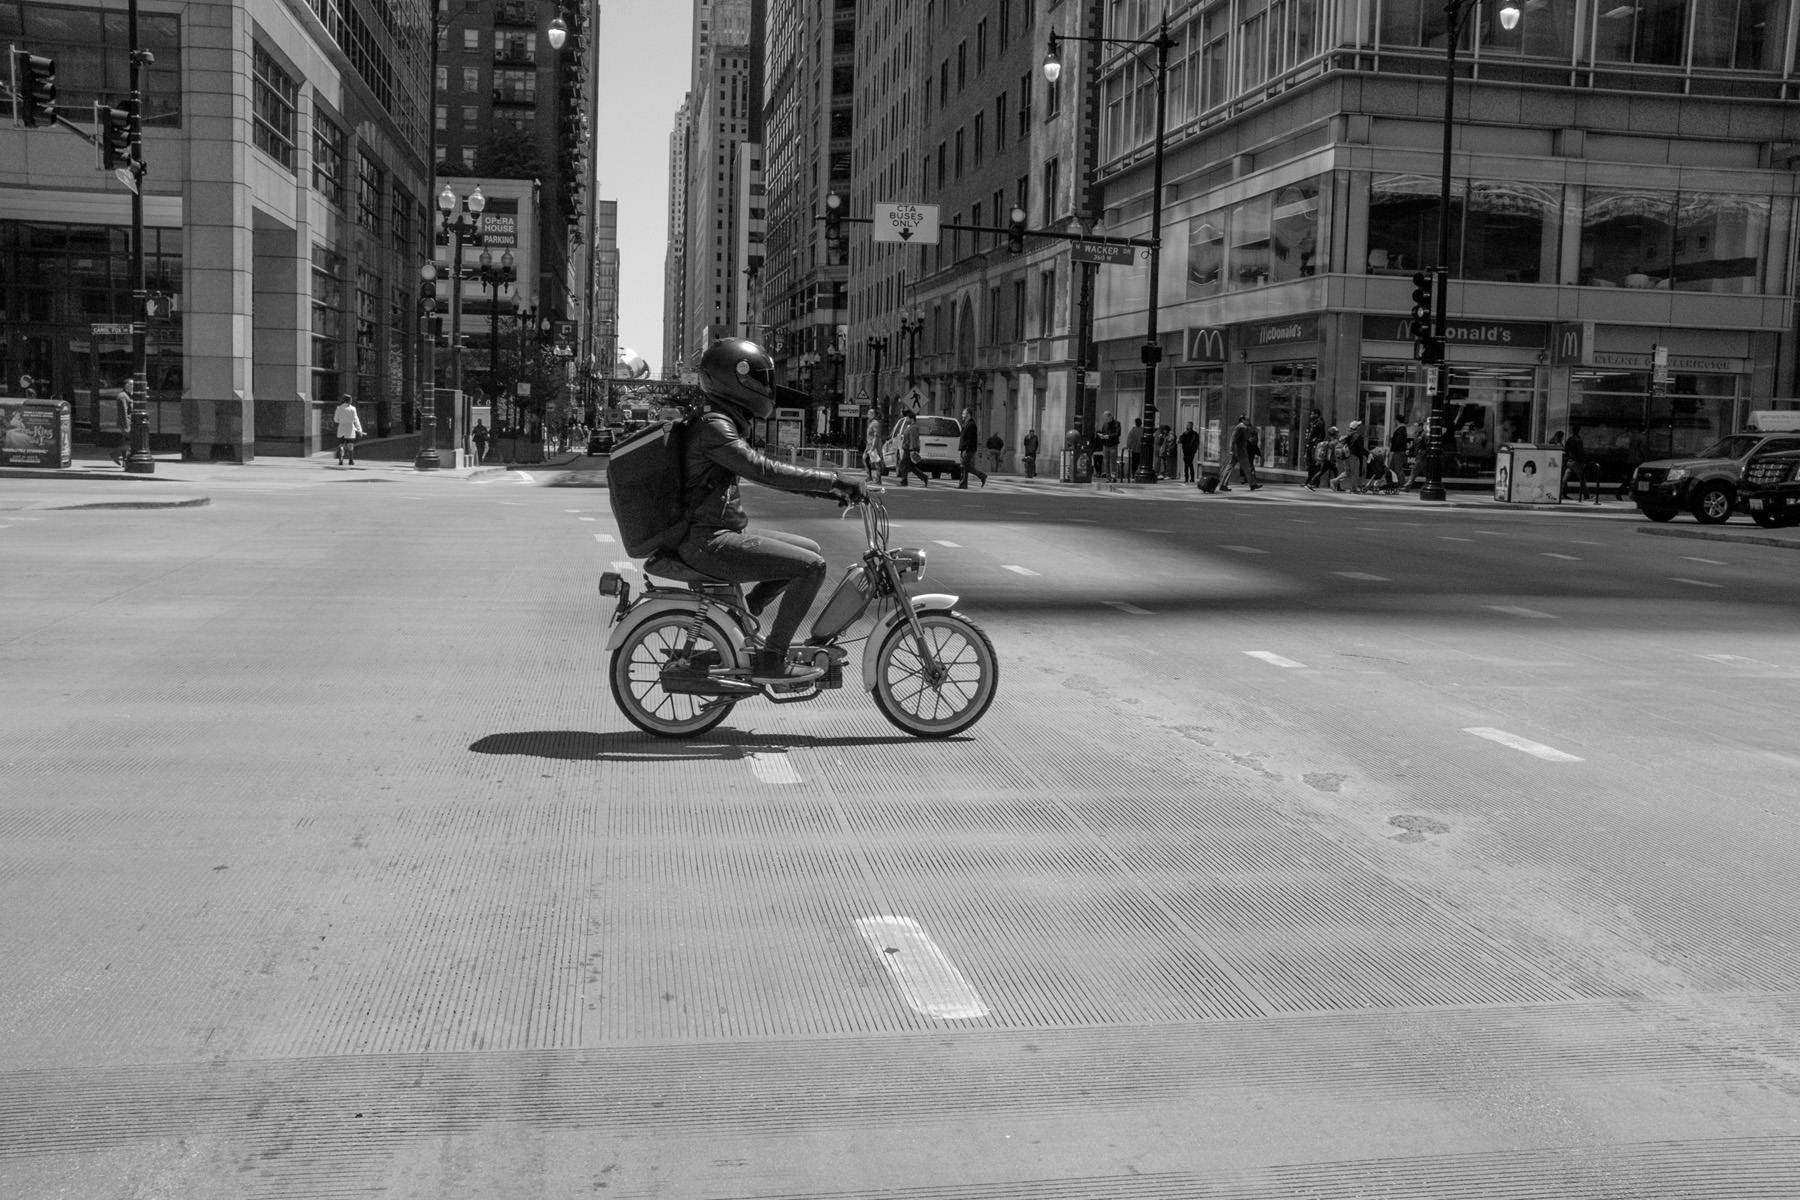 a motorcycle helmet wearing commuter riding a moped in downtown chicago.